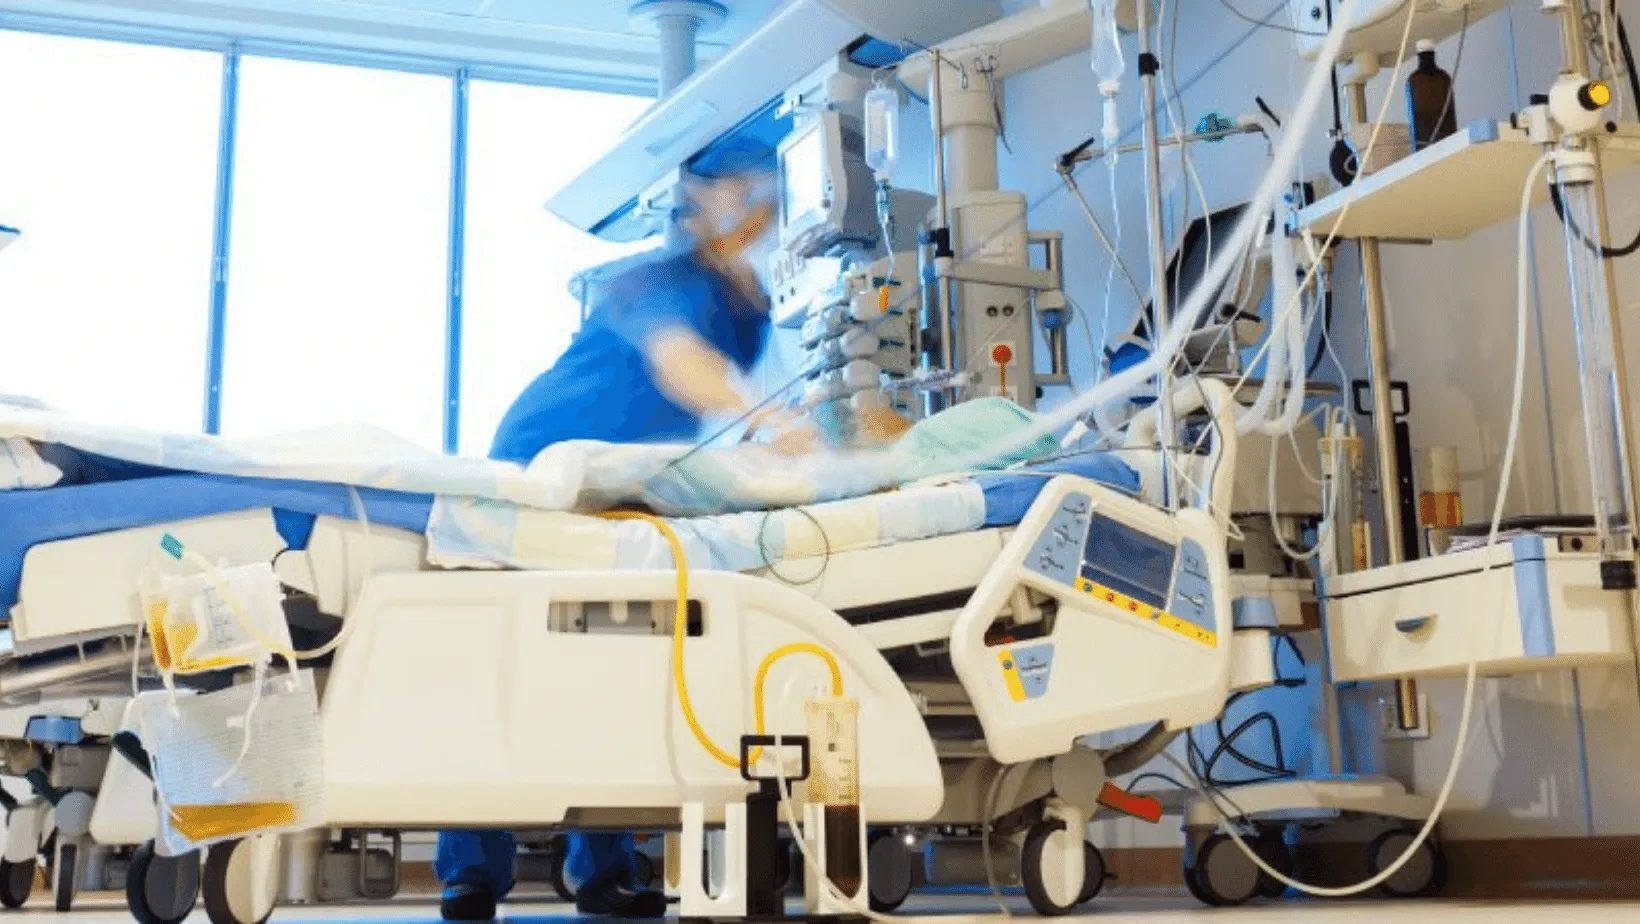 Motion blur image of a nurse in blue scrubs attending to a patient in an intensive care unit (ICU), surrounded by advanced medical equipment and monitors.